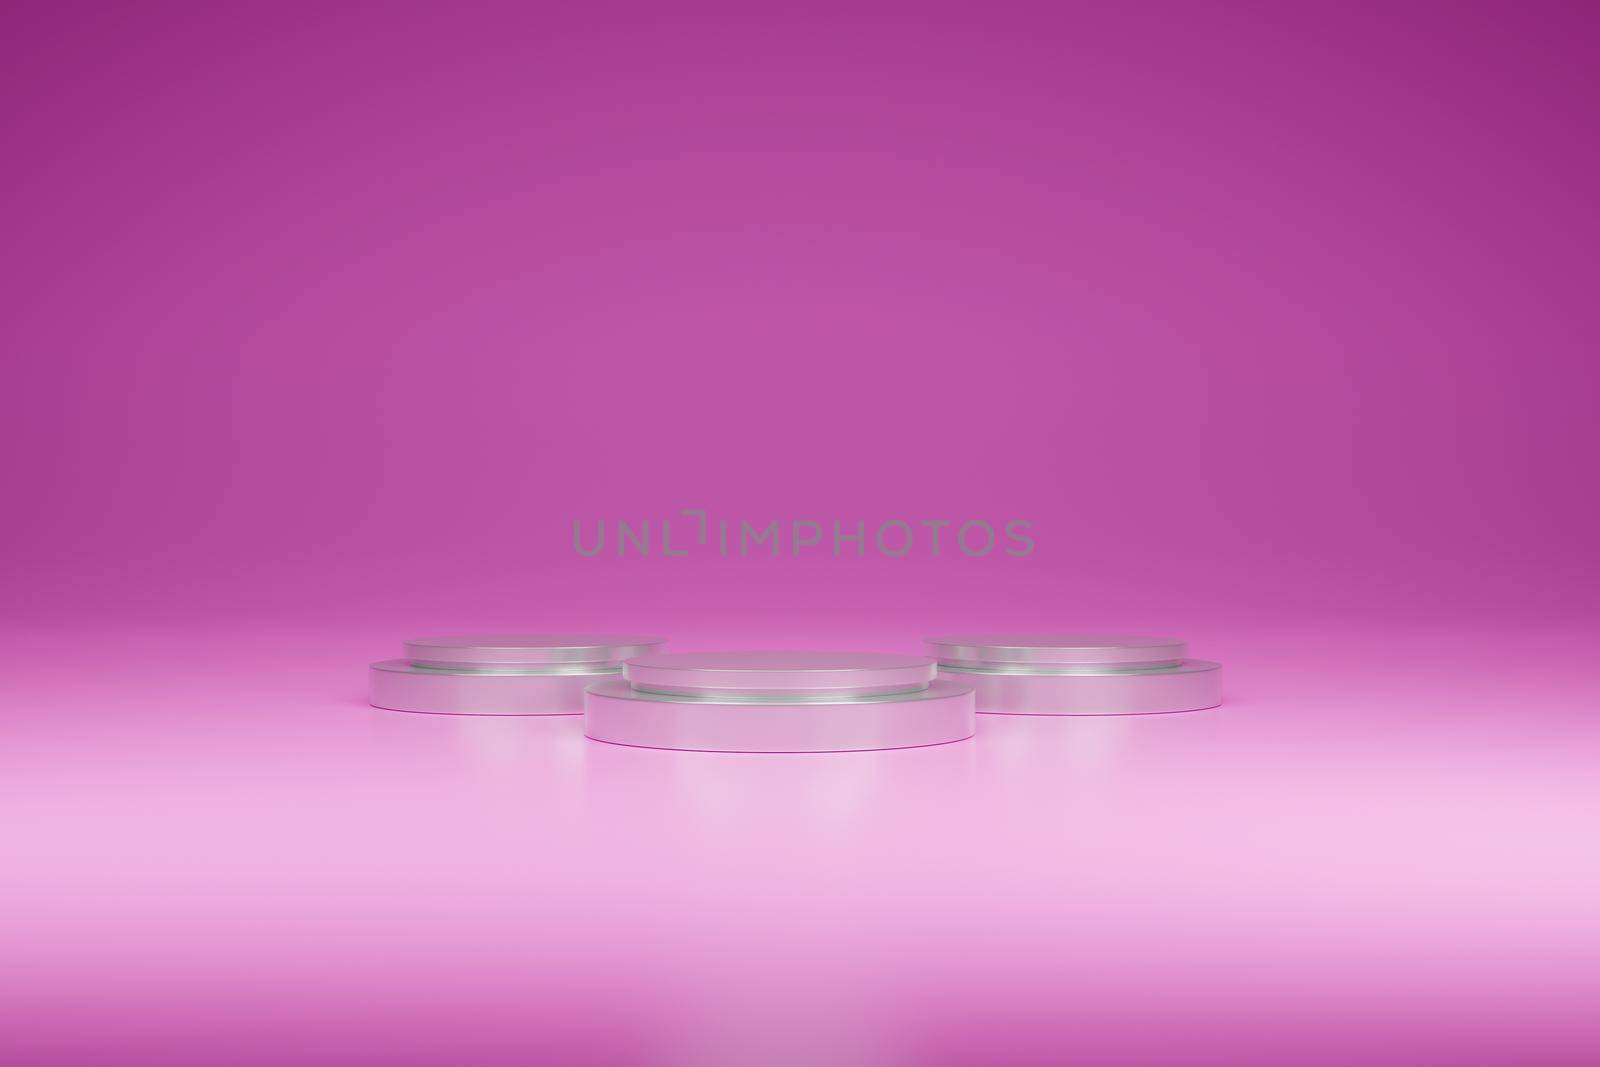 3 pieces white stainless podium 3D rendering on a pink background.show products.